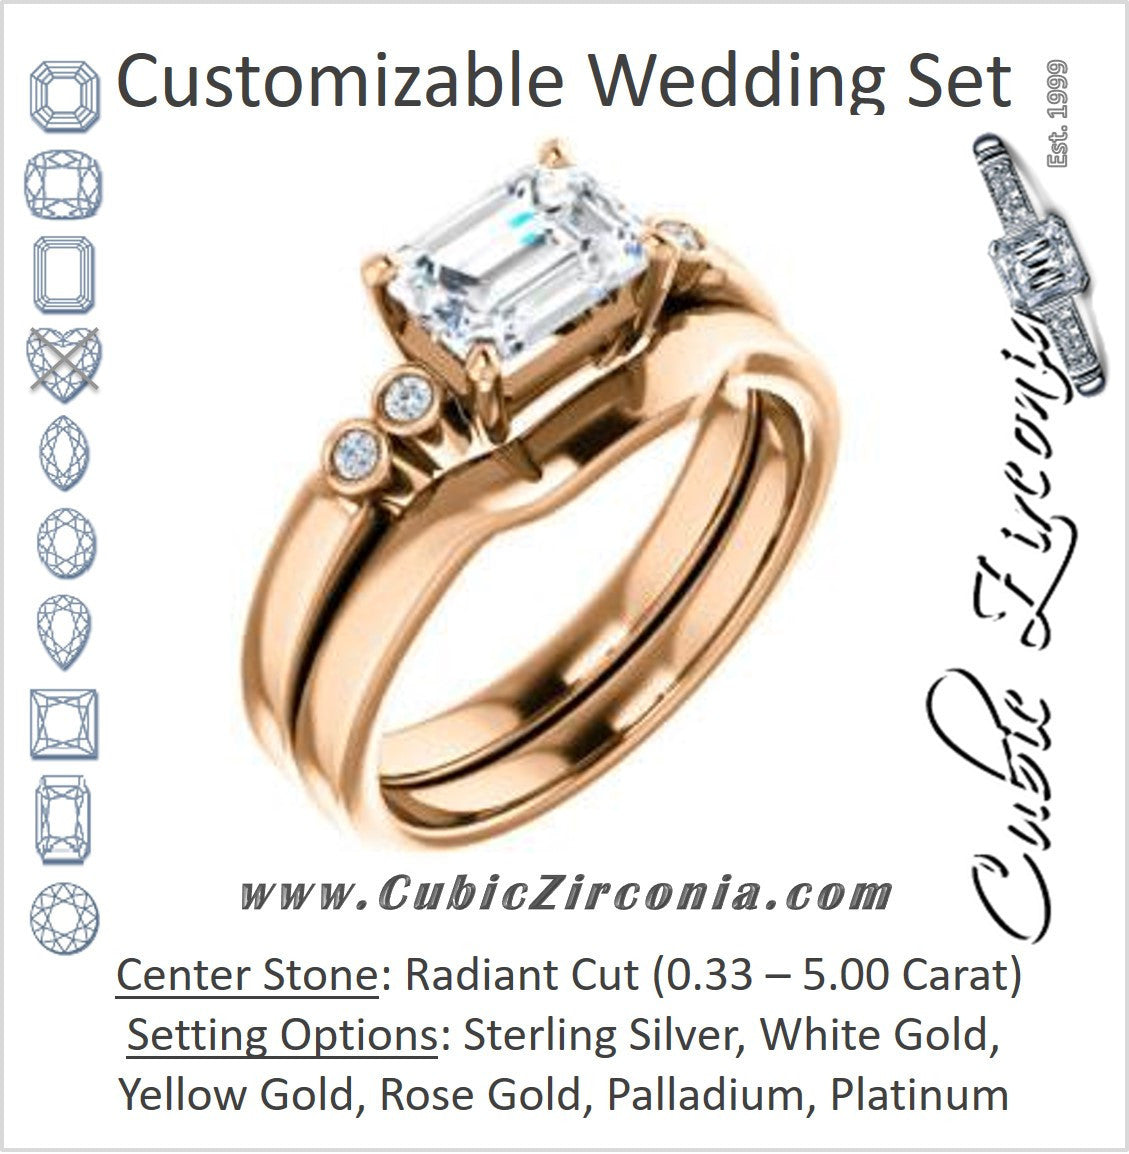 CZ Wedding Set, featuring The Luzella engagement ring (Customizable 5-stone Design with Radiant Cut Center and Round Bezel Accents)